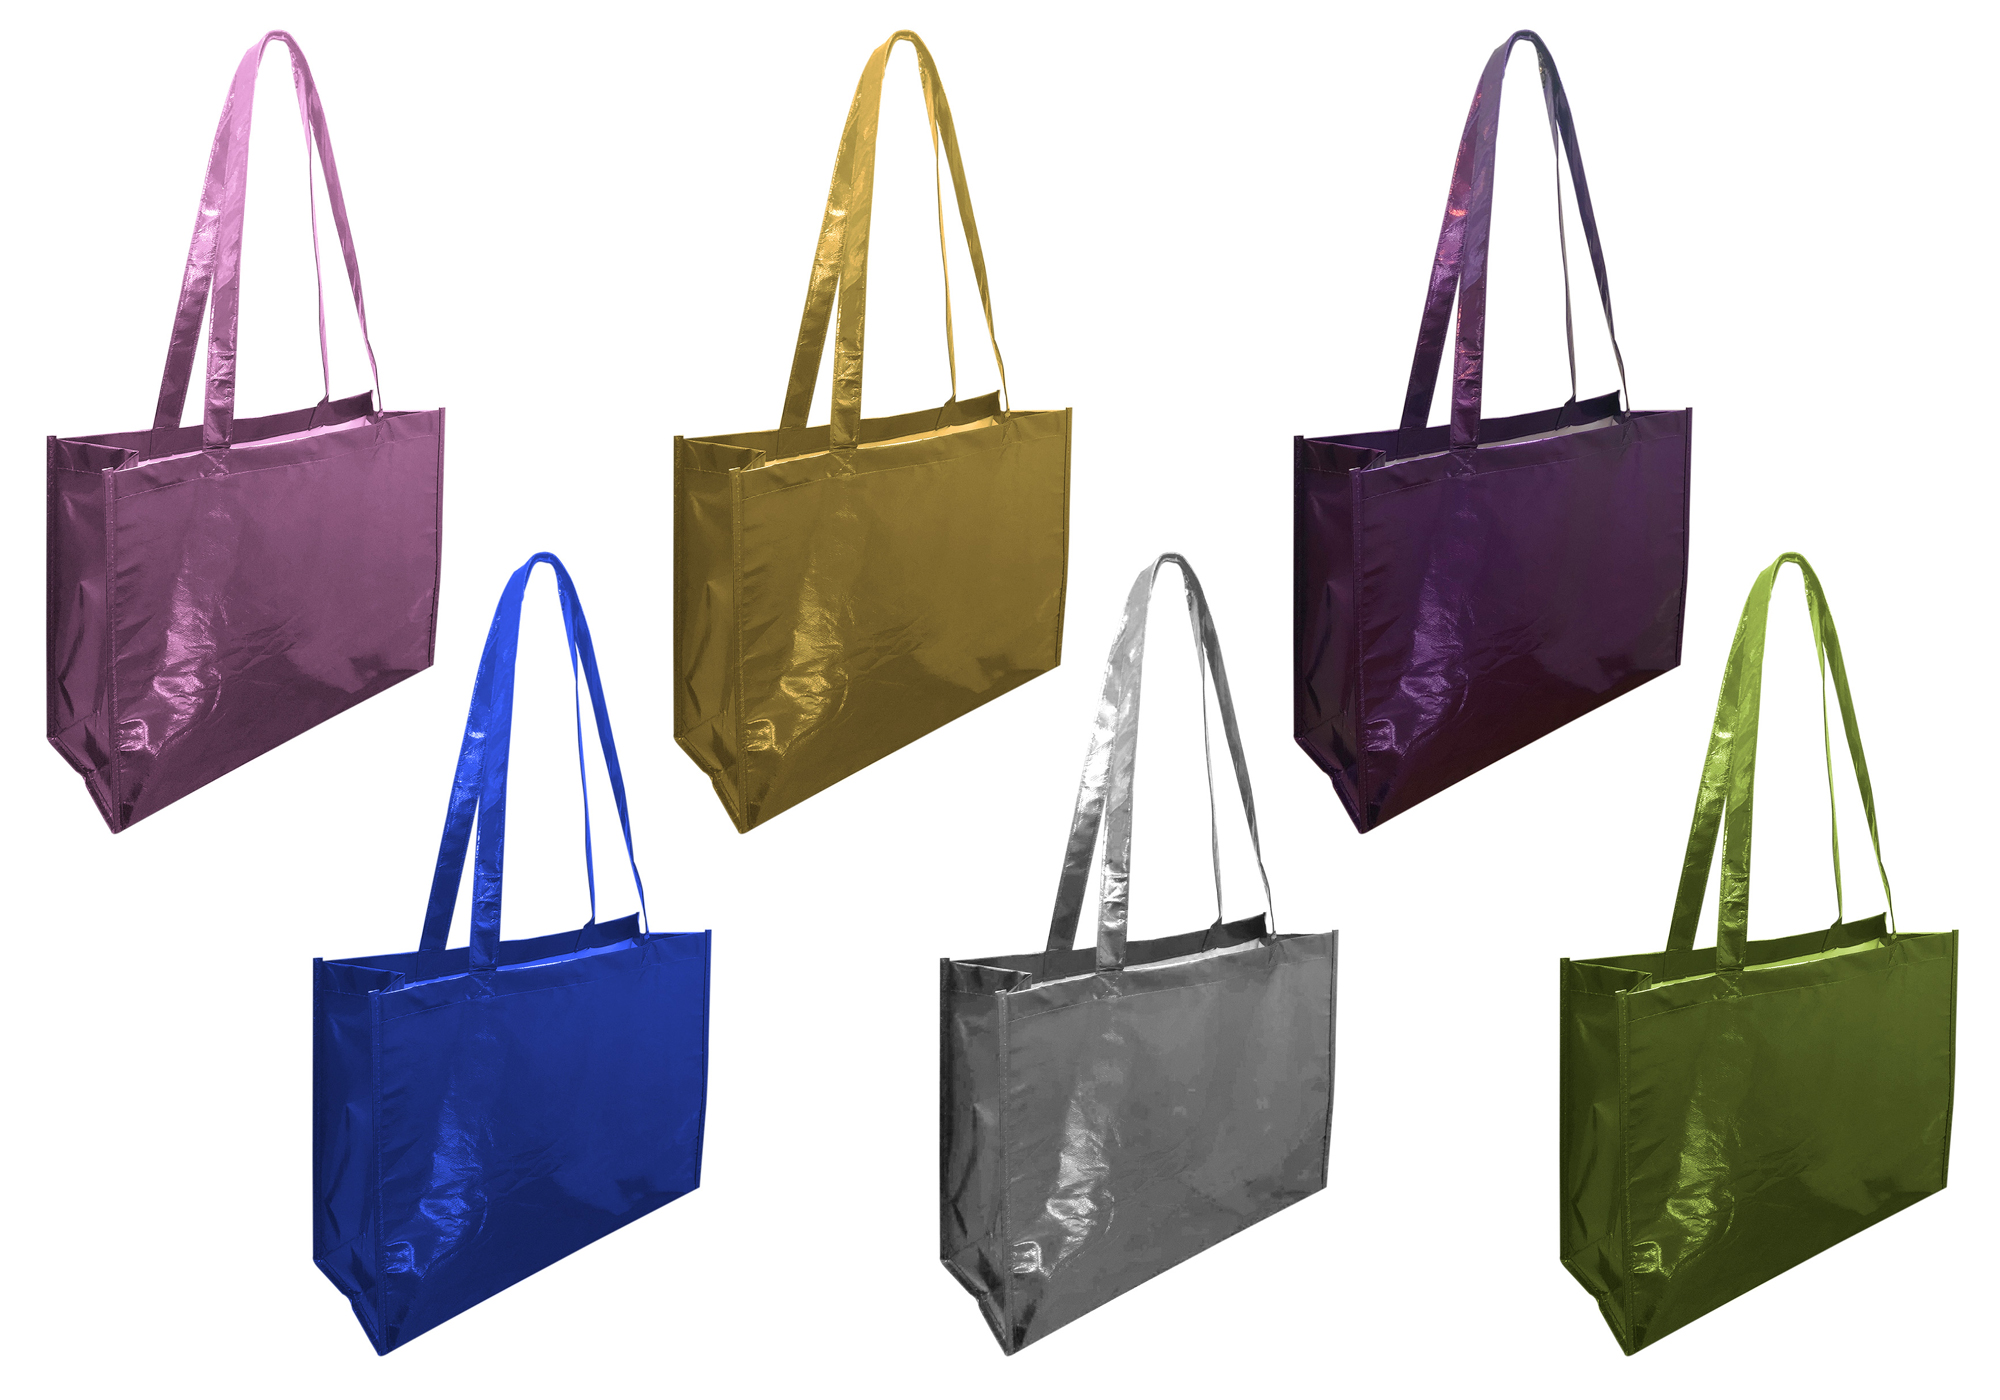 ''Metallic Patent Leather Tote Bags - 16'''' x 12'''' - Choose Your Color(s)''